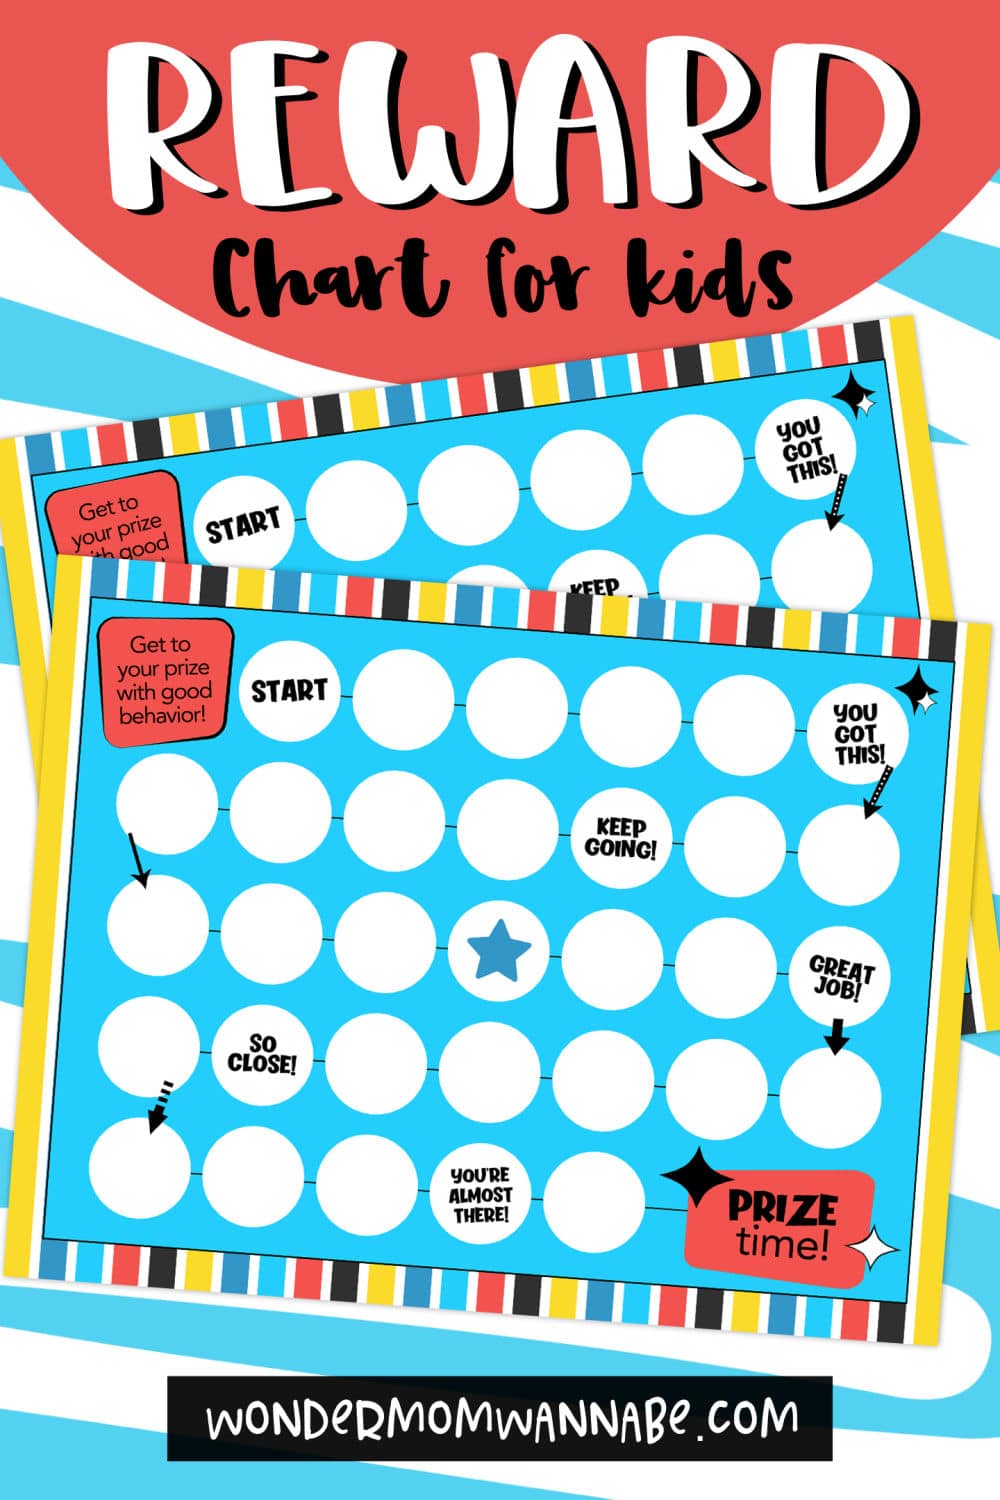 This printable reward chart for kids can be used in many ways and is a great tool to help kids improve behavior and reach goals. #printables #rewardcharts #printablesforkids #rewardchartprintable via @wondermomwannab